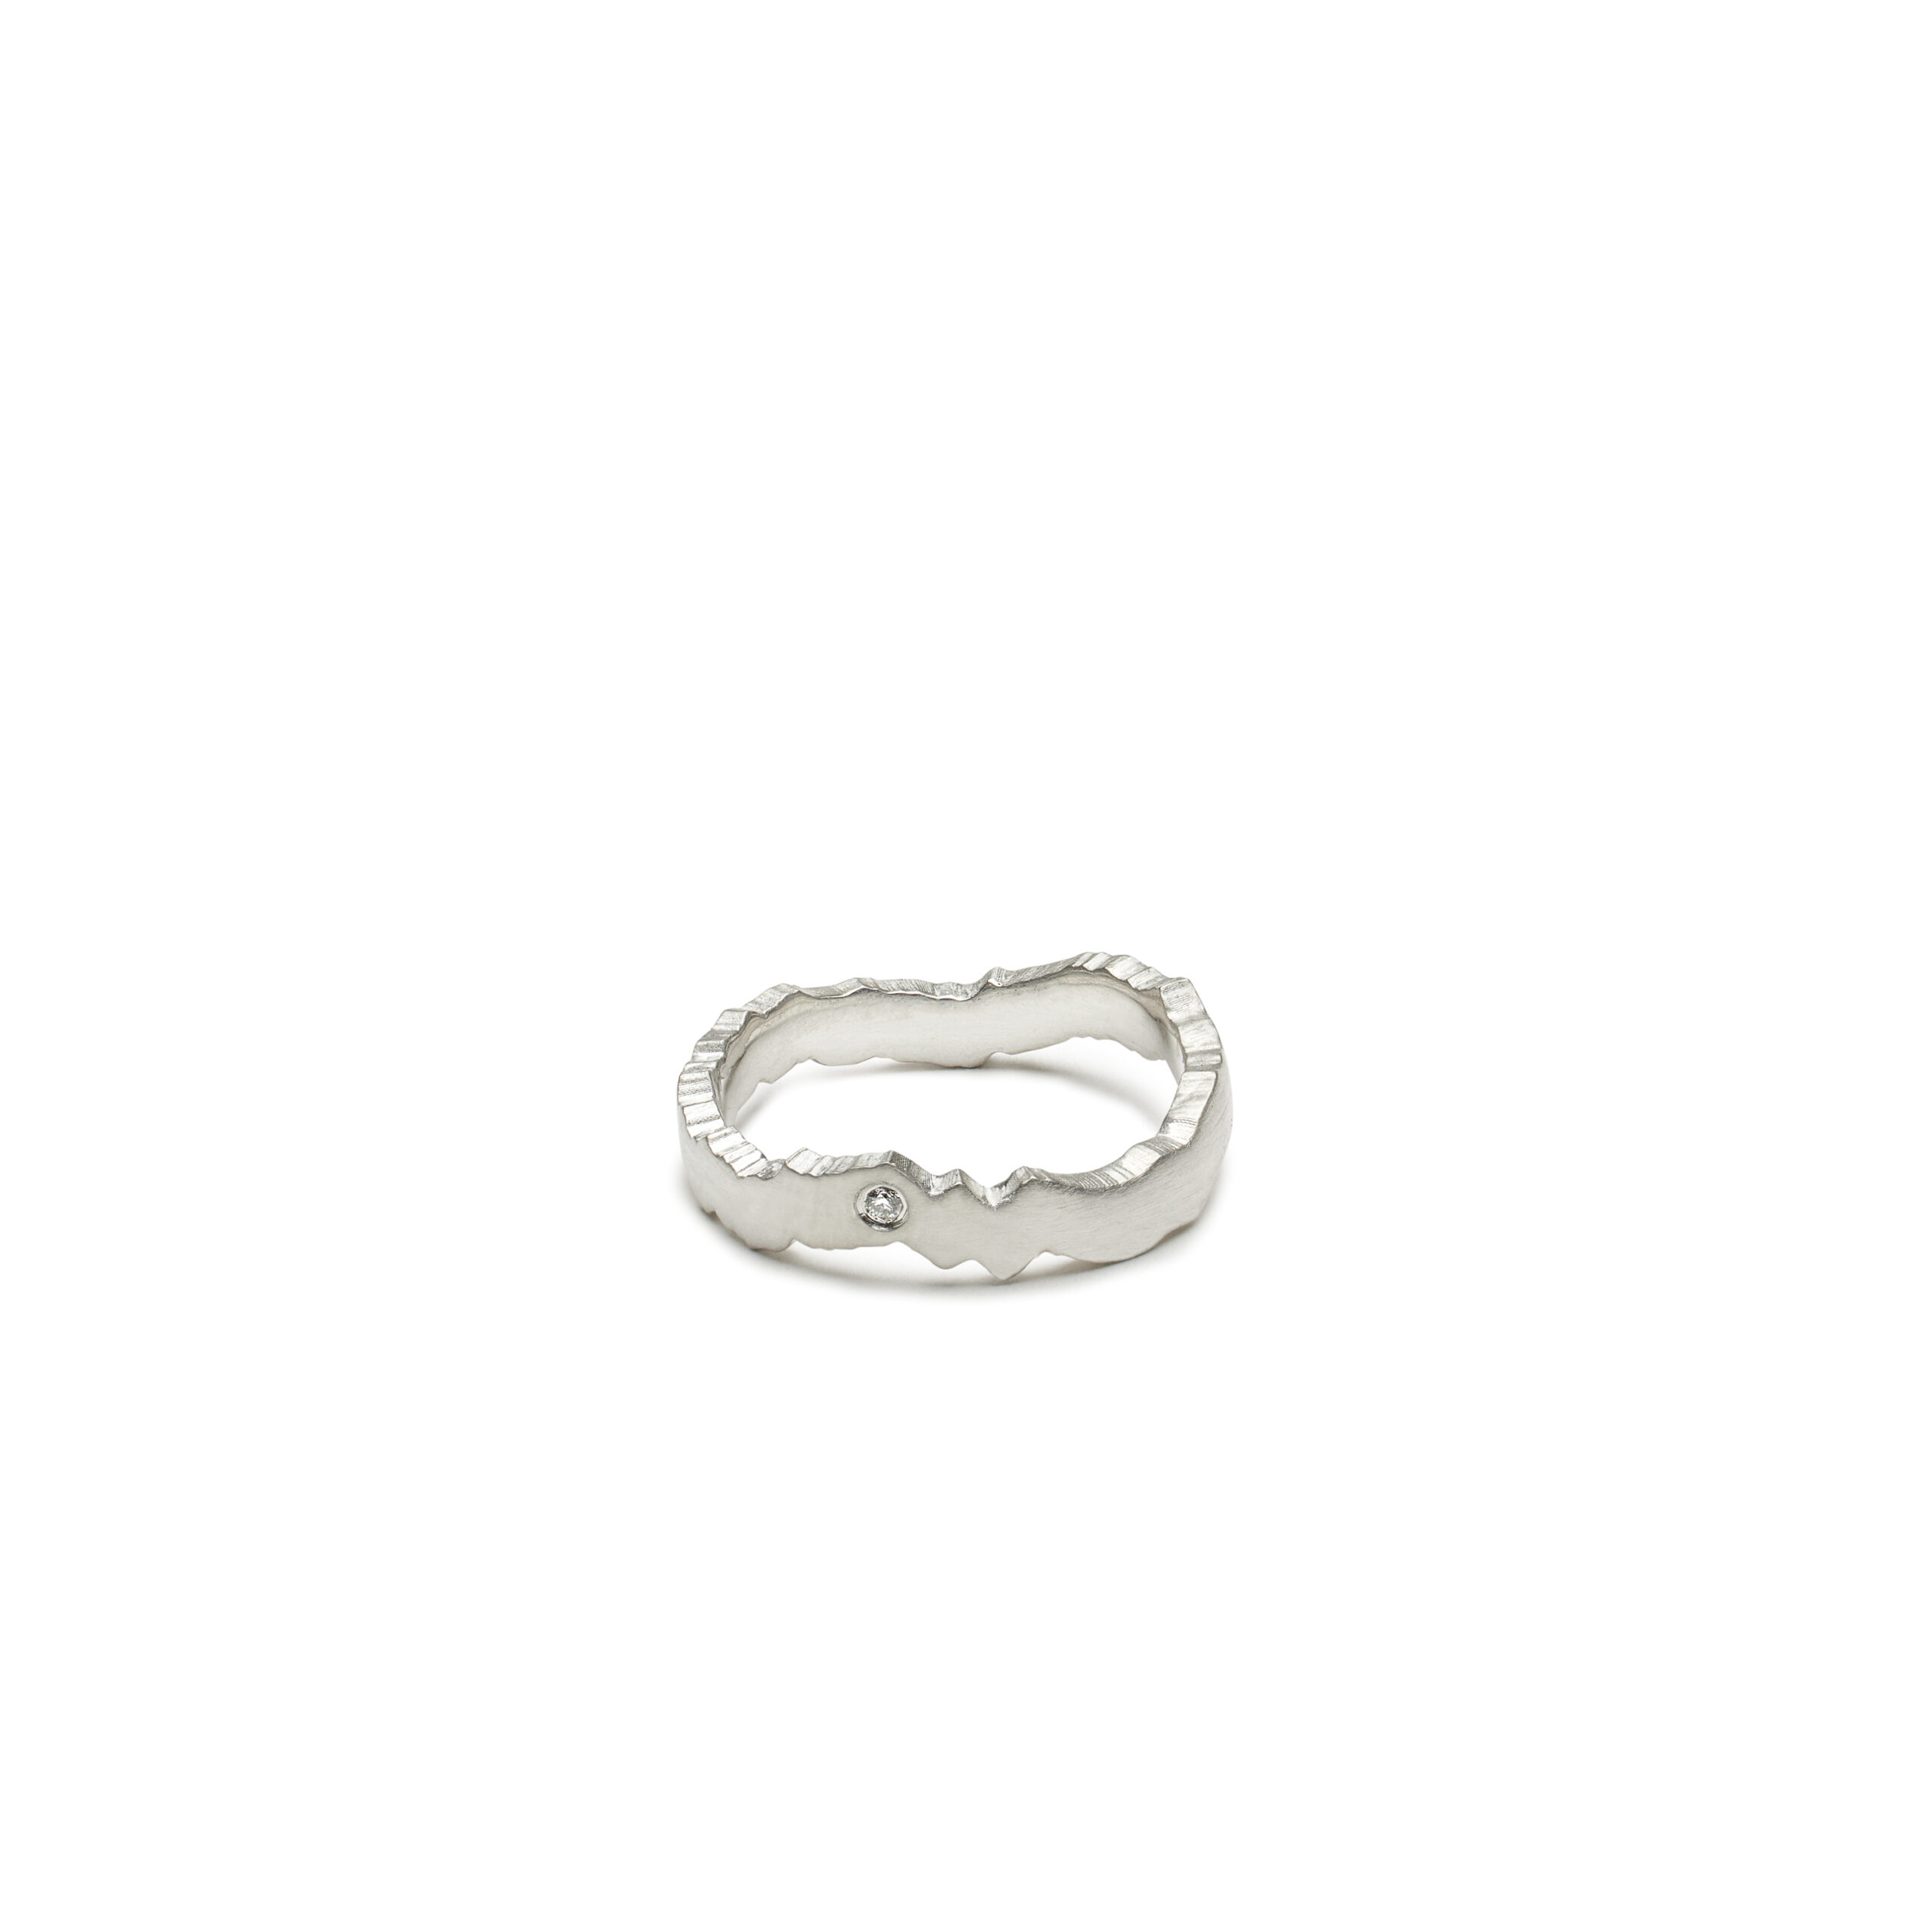 Ring depicting the ridgeline of the long trail in Vermont